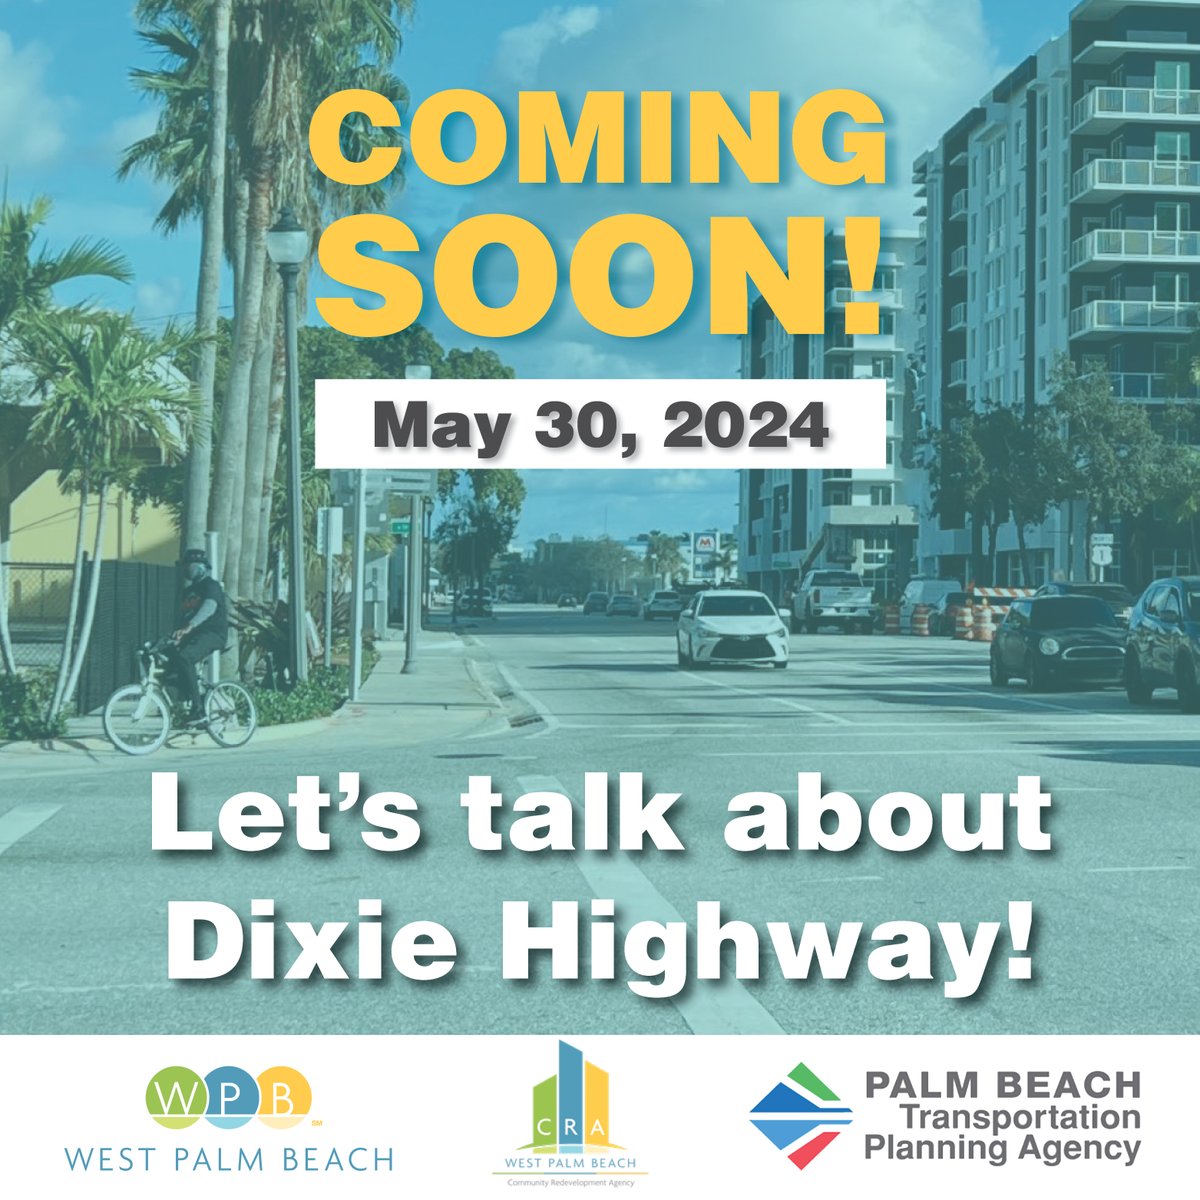 SAVE THE DATE! Join a discussion on the Dixie Highway Lane Repurposing Project on May 30. We'll consider a reimagined use of Dixie Hwy. from Quadrille Blvd. to 25th Street. We want to get feedback from you! Save the date, location to be announced in the coming days. #wpb